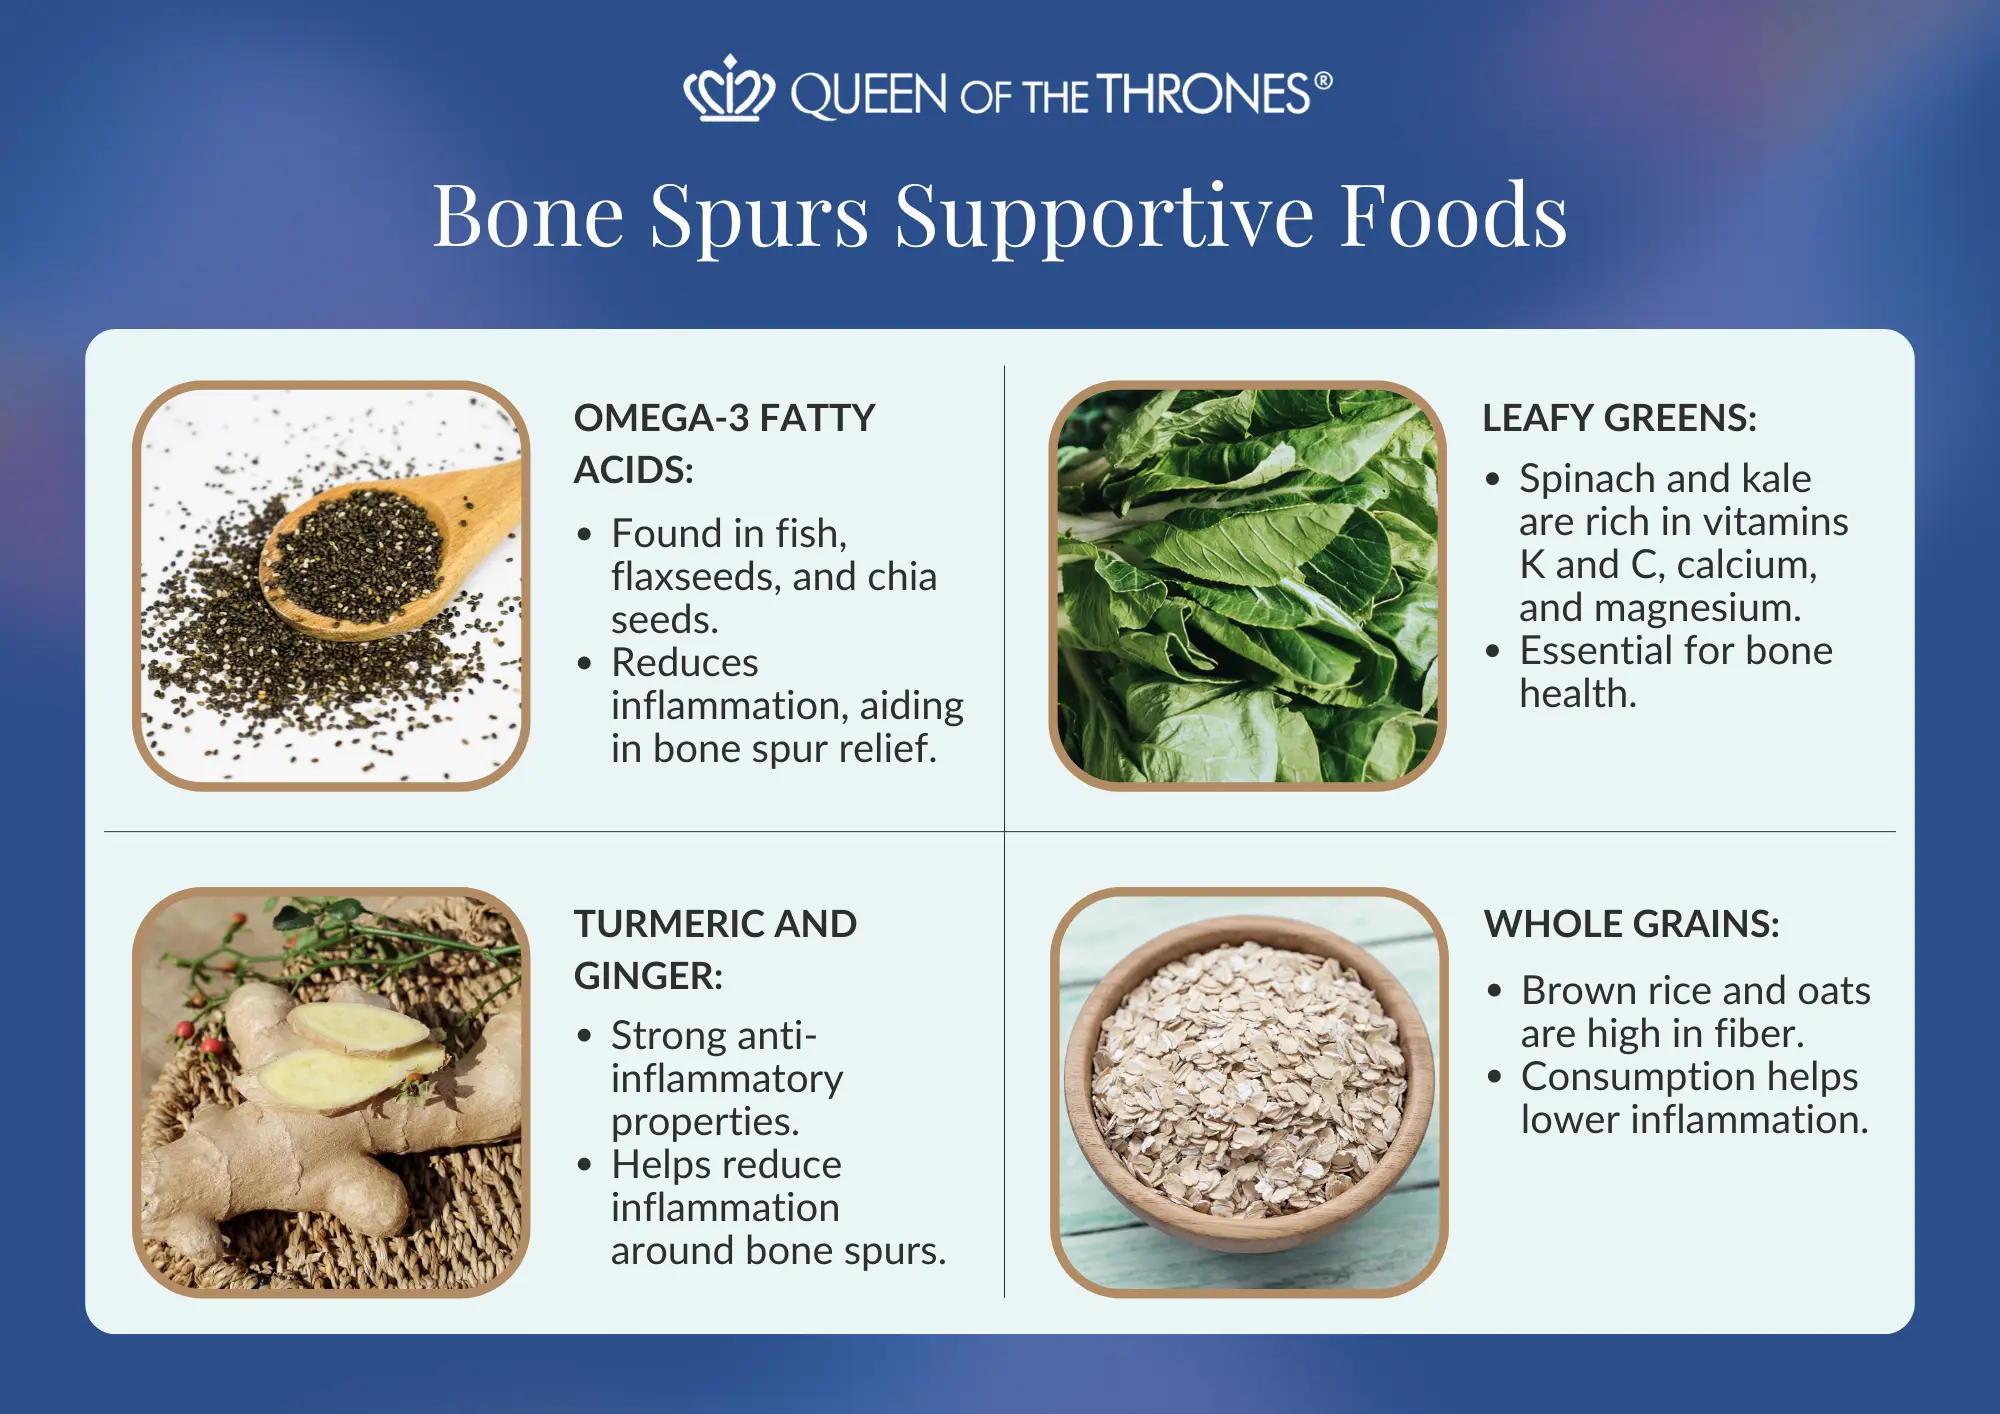 Bone spurs supportive foods by Queen of the Thrones